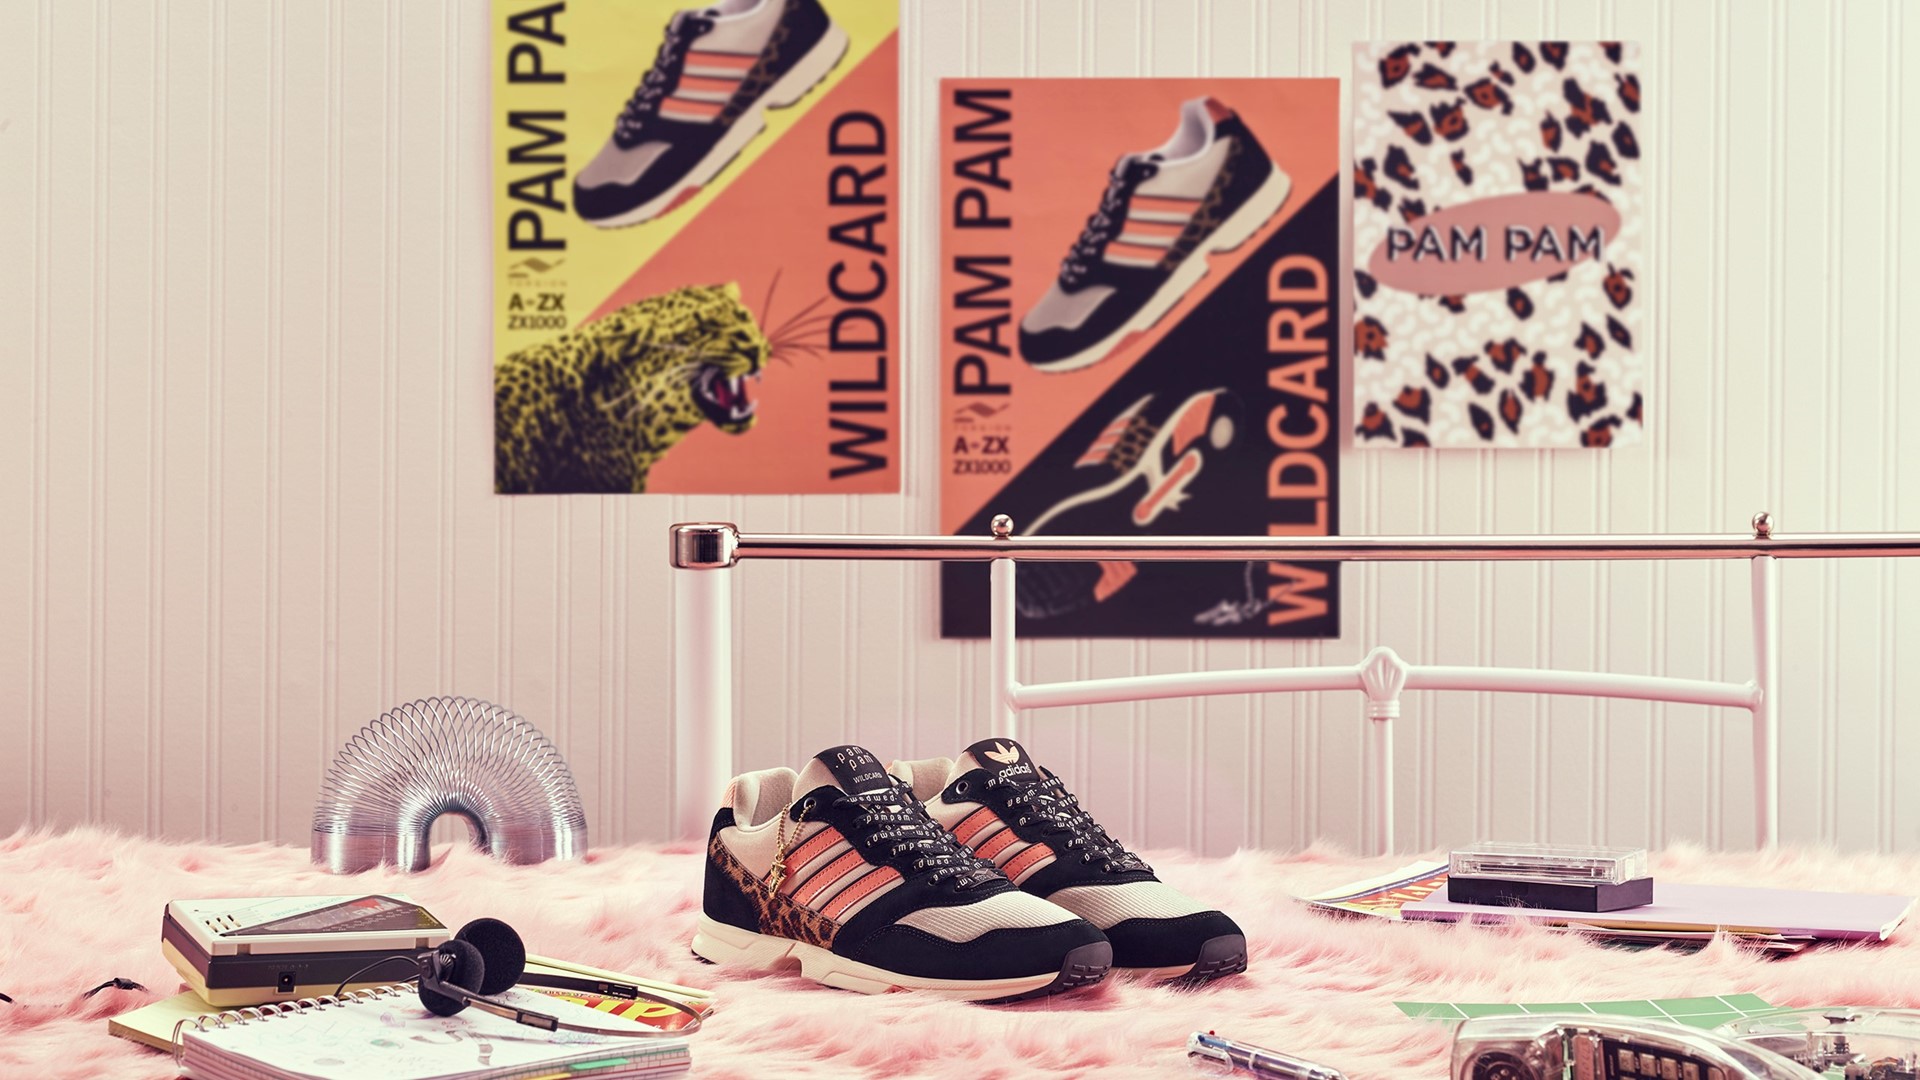 P is for pam pam: Presenting a Bold Take on the ZX 1000 Silhouette